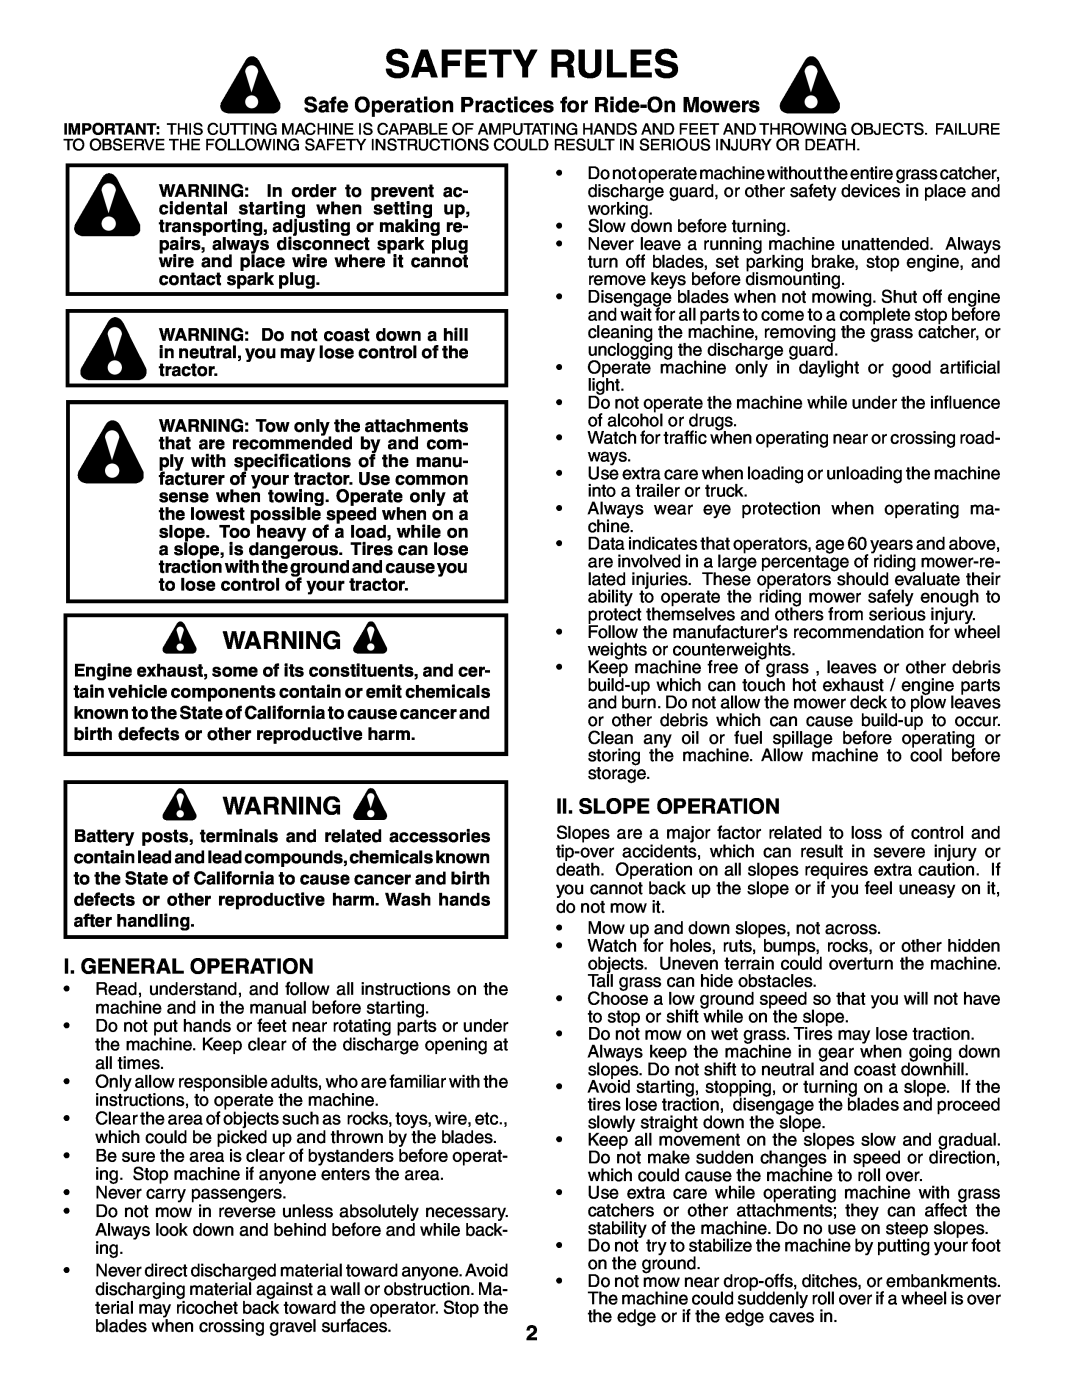 Poulan 195032 manual Safety Rules, Safe Operation Practices for Ride-On Mowers, I. General Operation, Ii. Slope Operation 